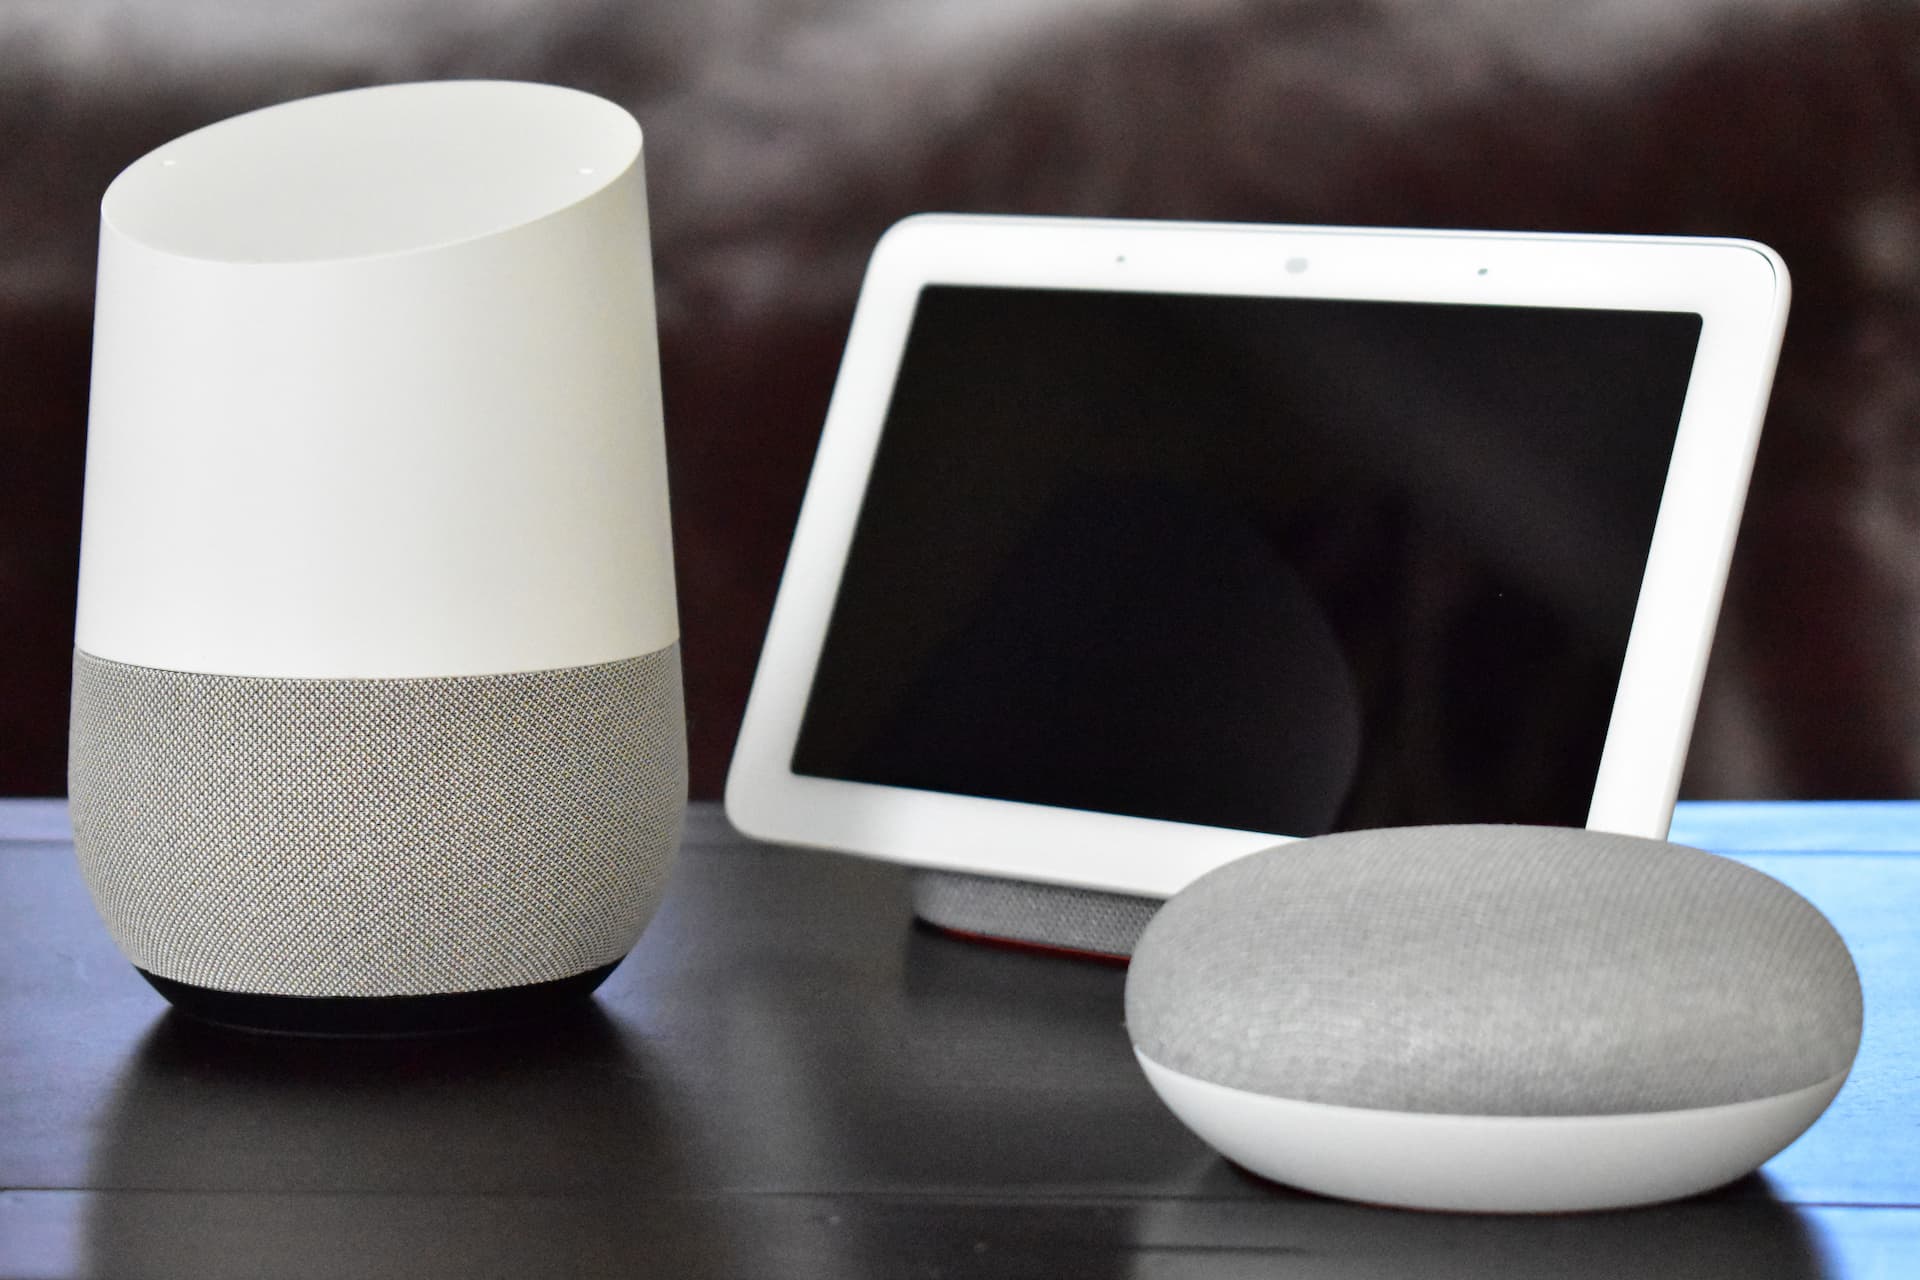 Google Home app shows 'Wi-Fi Labs' for certain users